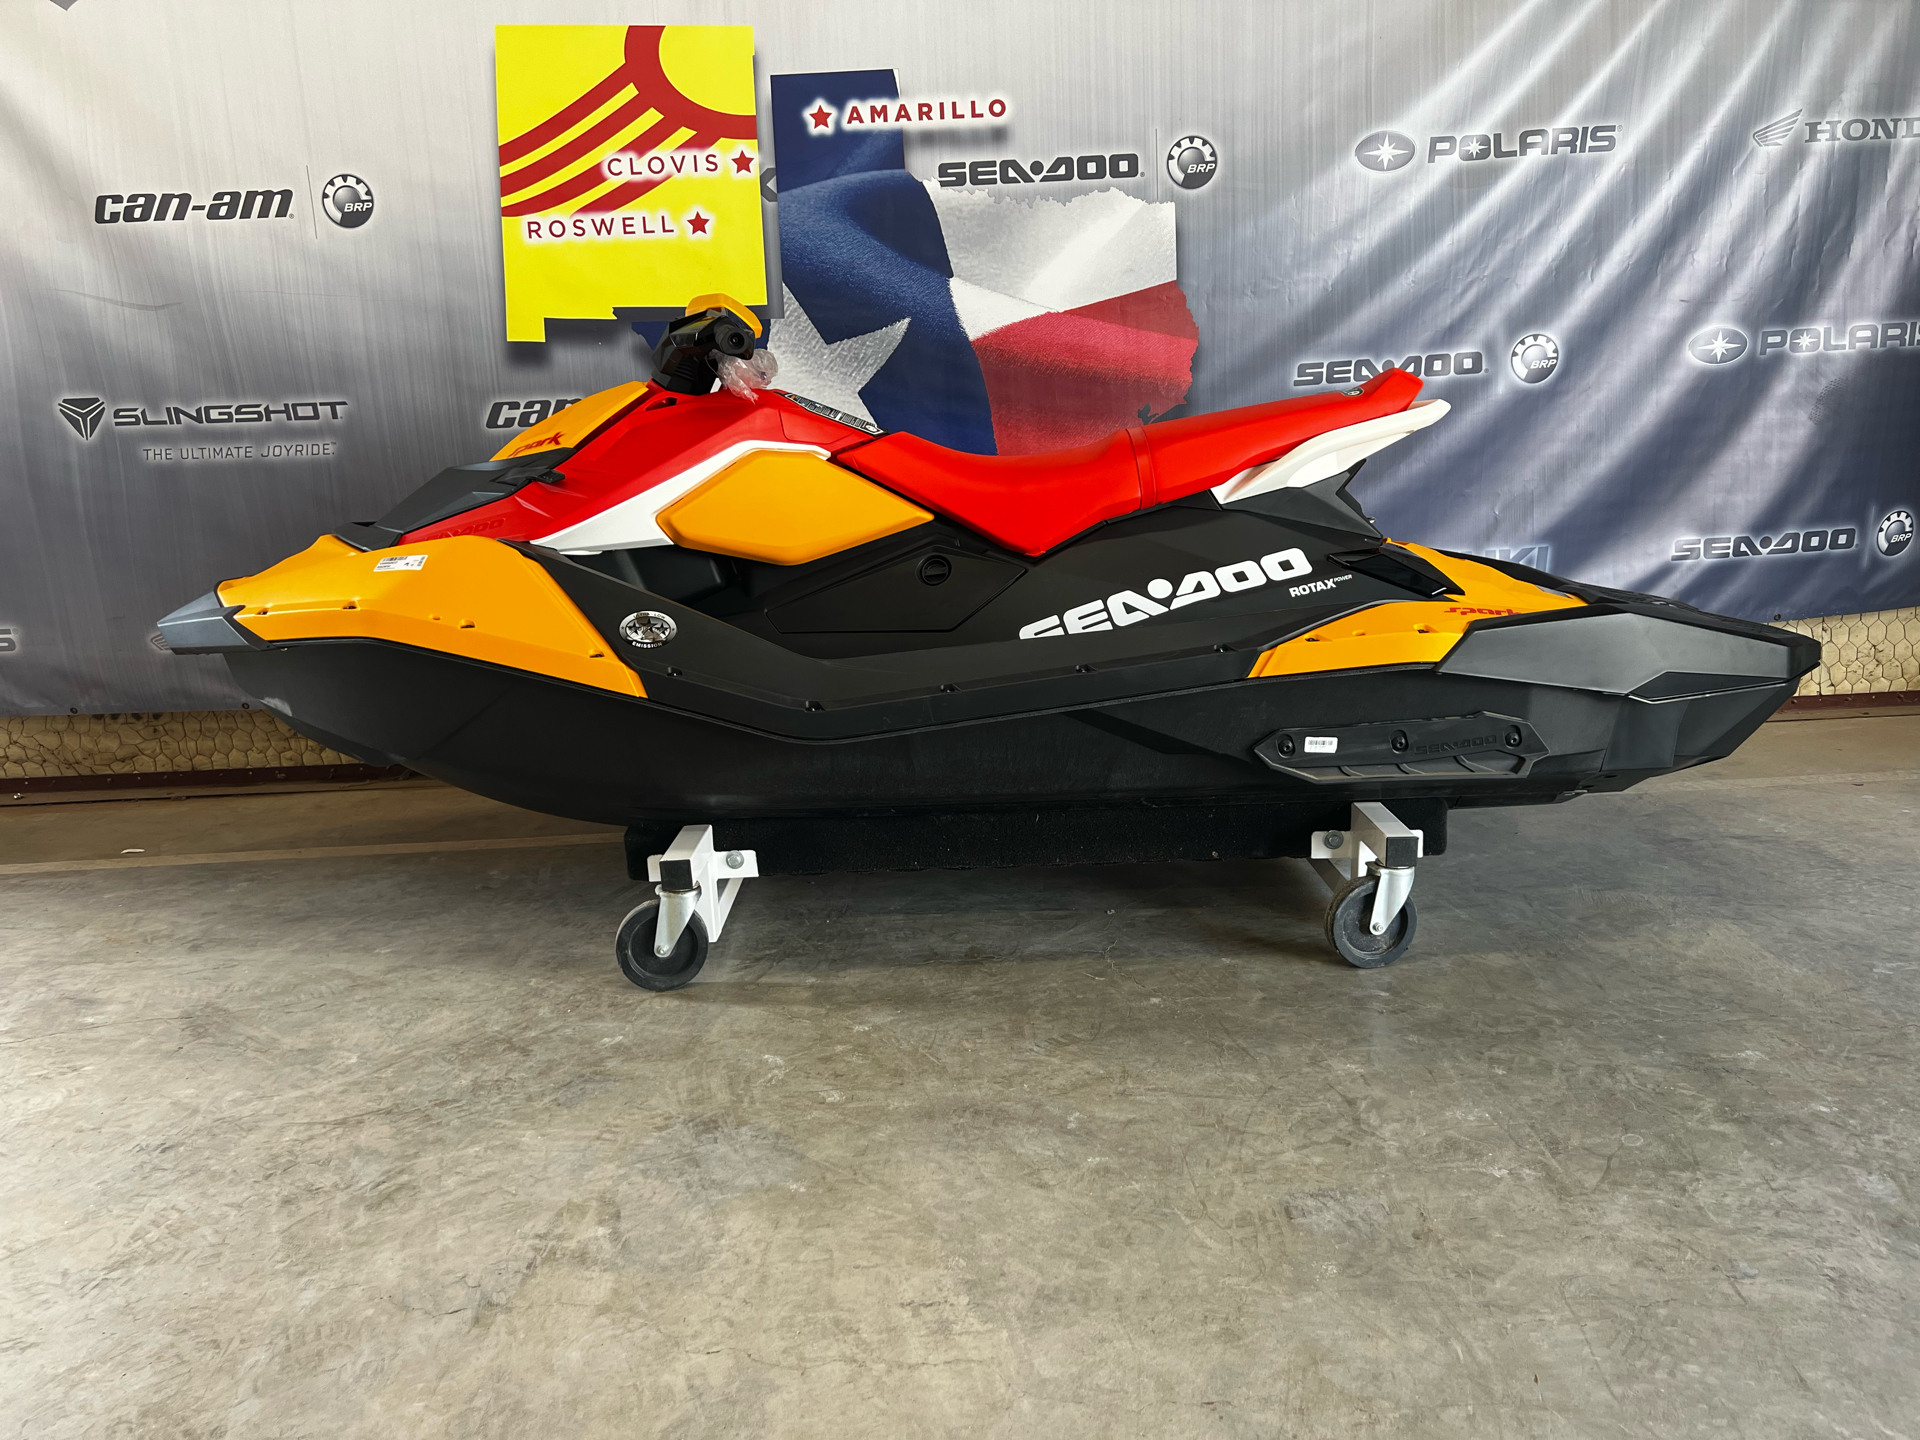 2022 Sea-Doo Spark 3up 90 hp iBR + Convenience Package in Amarillo, Texas - Photo 3